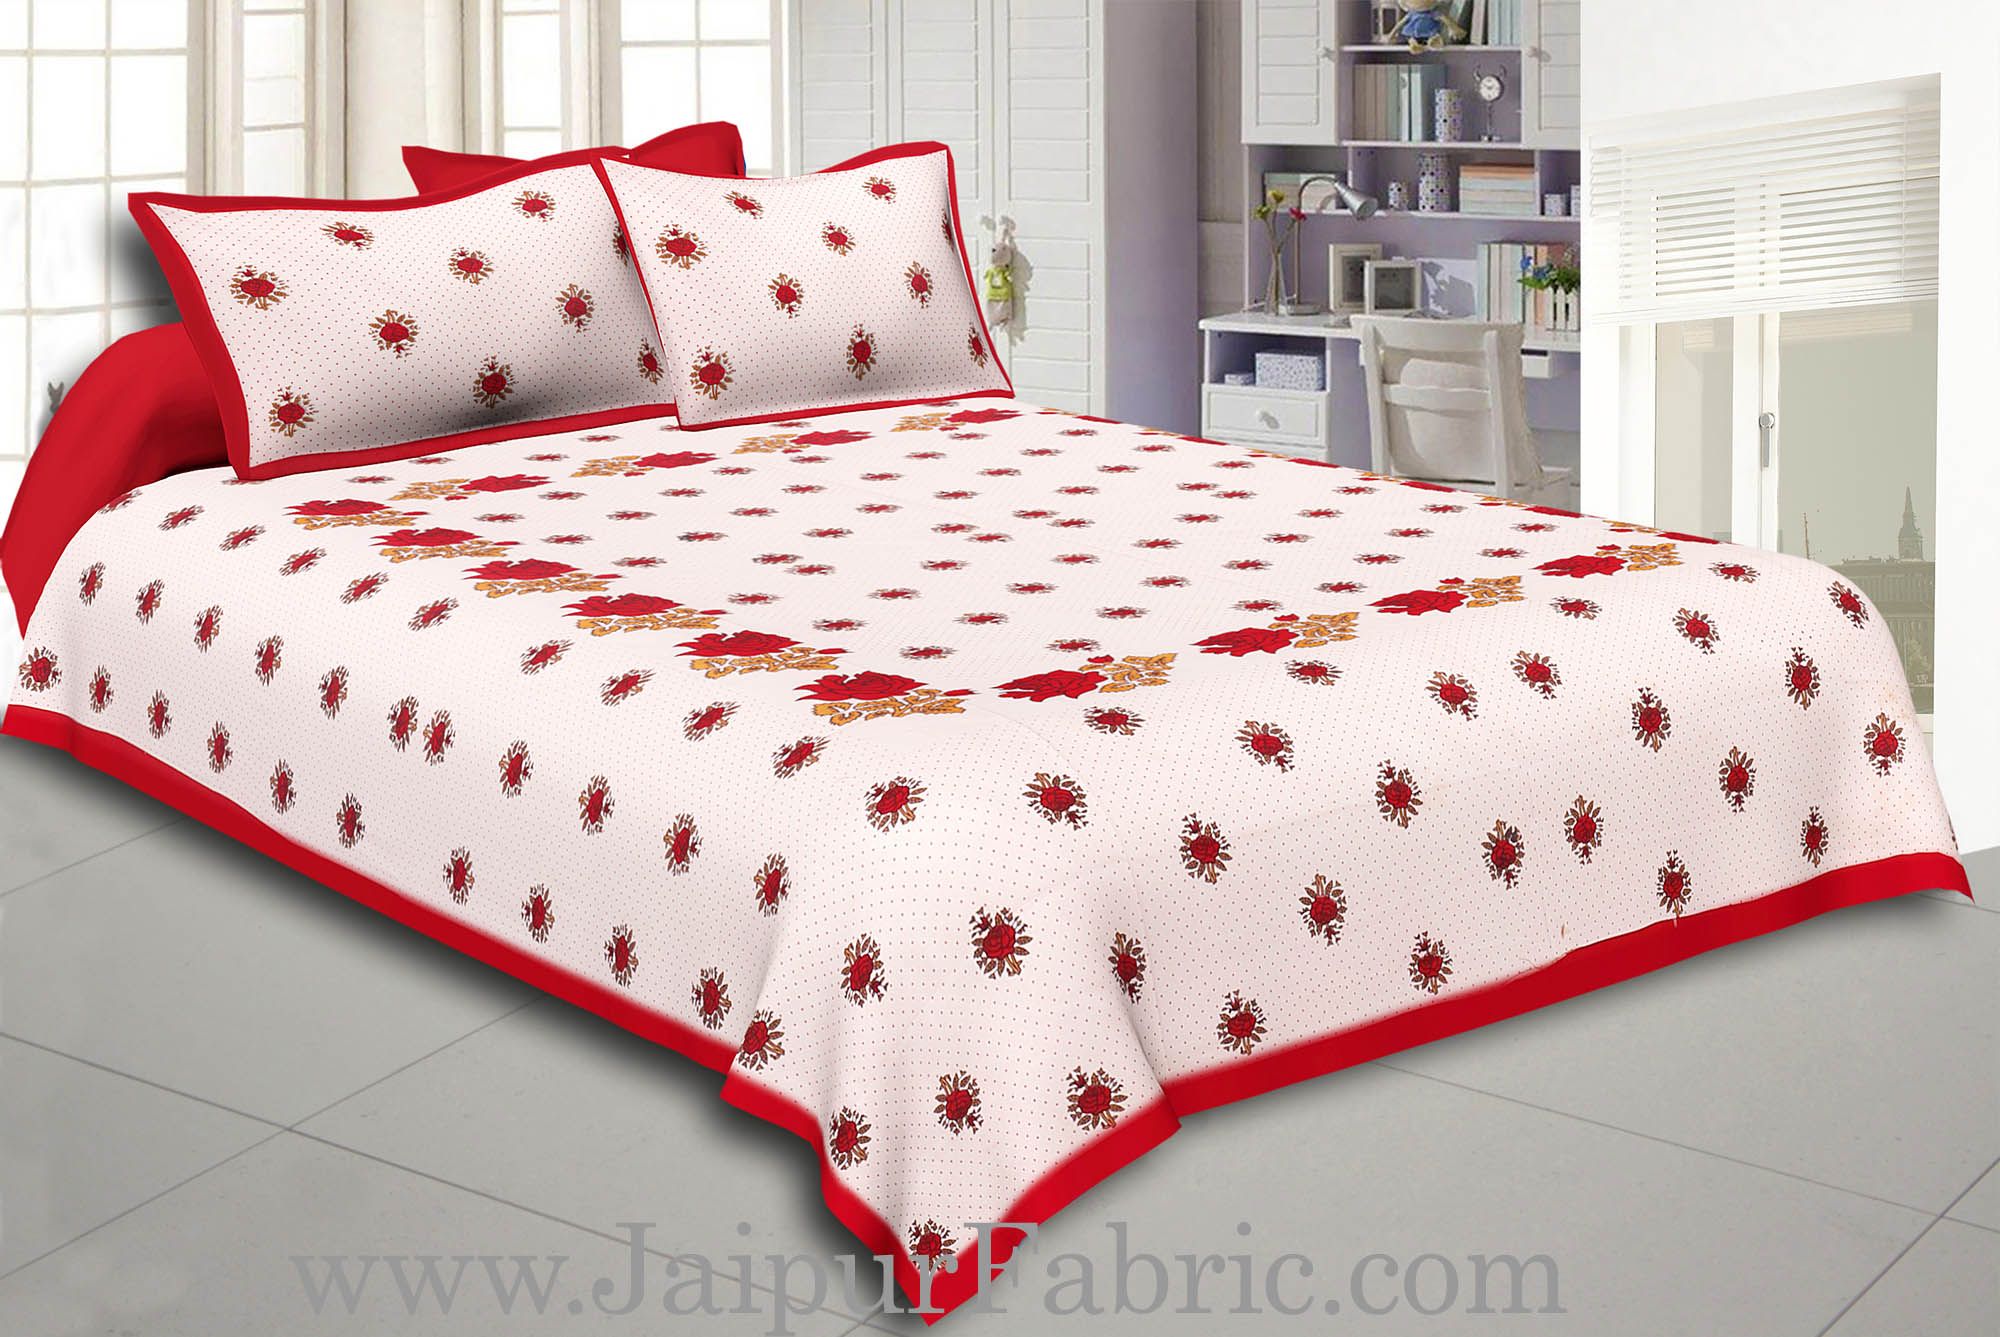 Dotted White Base Red Lotus Flower Print Cotton Double Bed Sheet